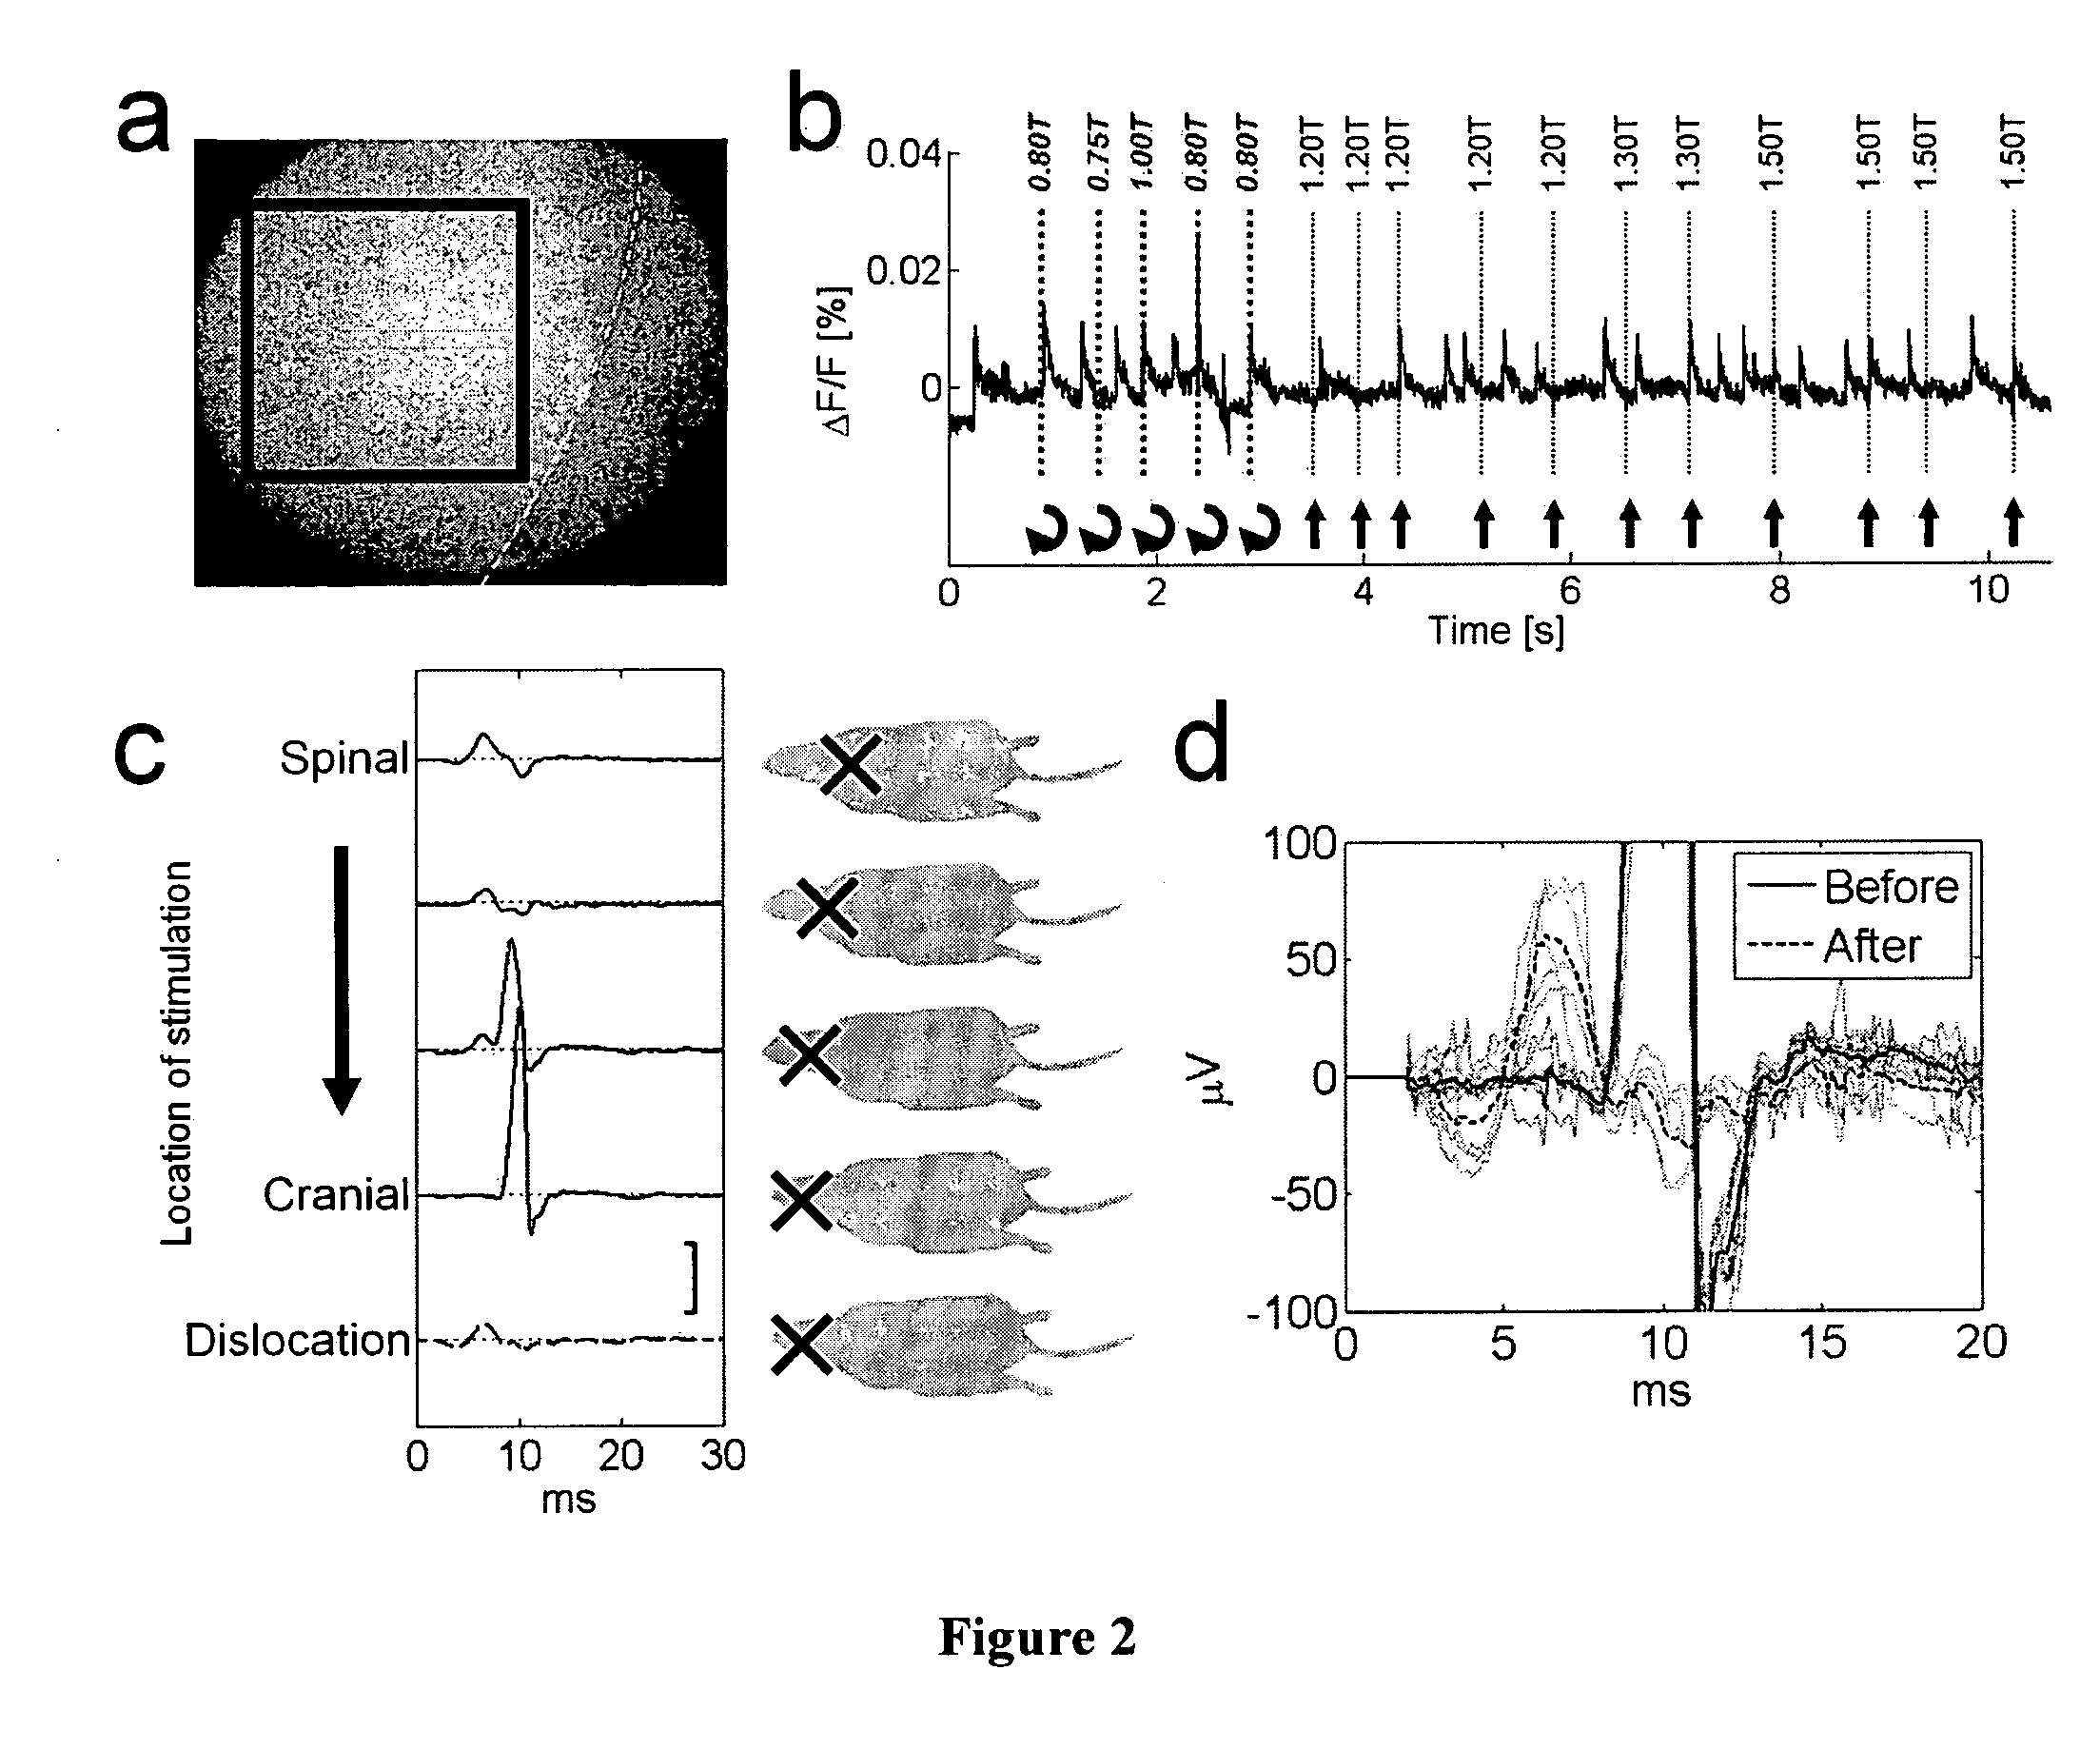 Magnetic configuration and timing scheme for transcranial magnetic stimulation